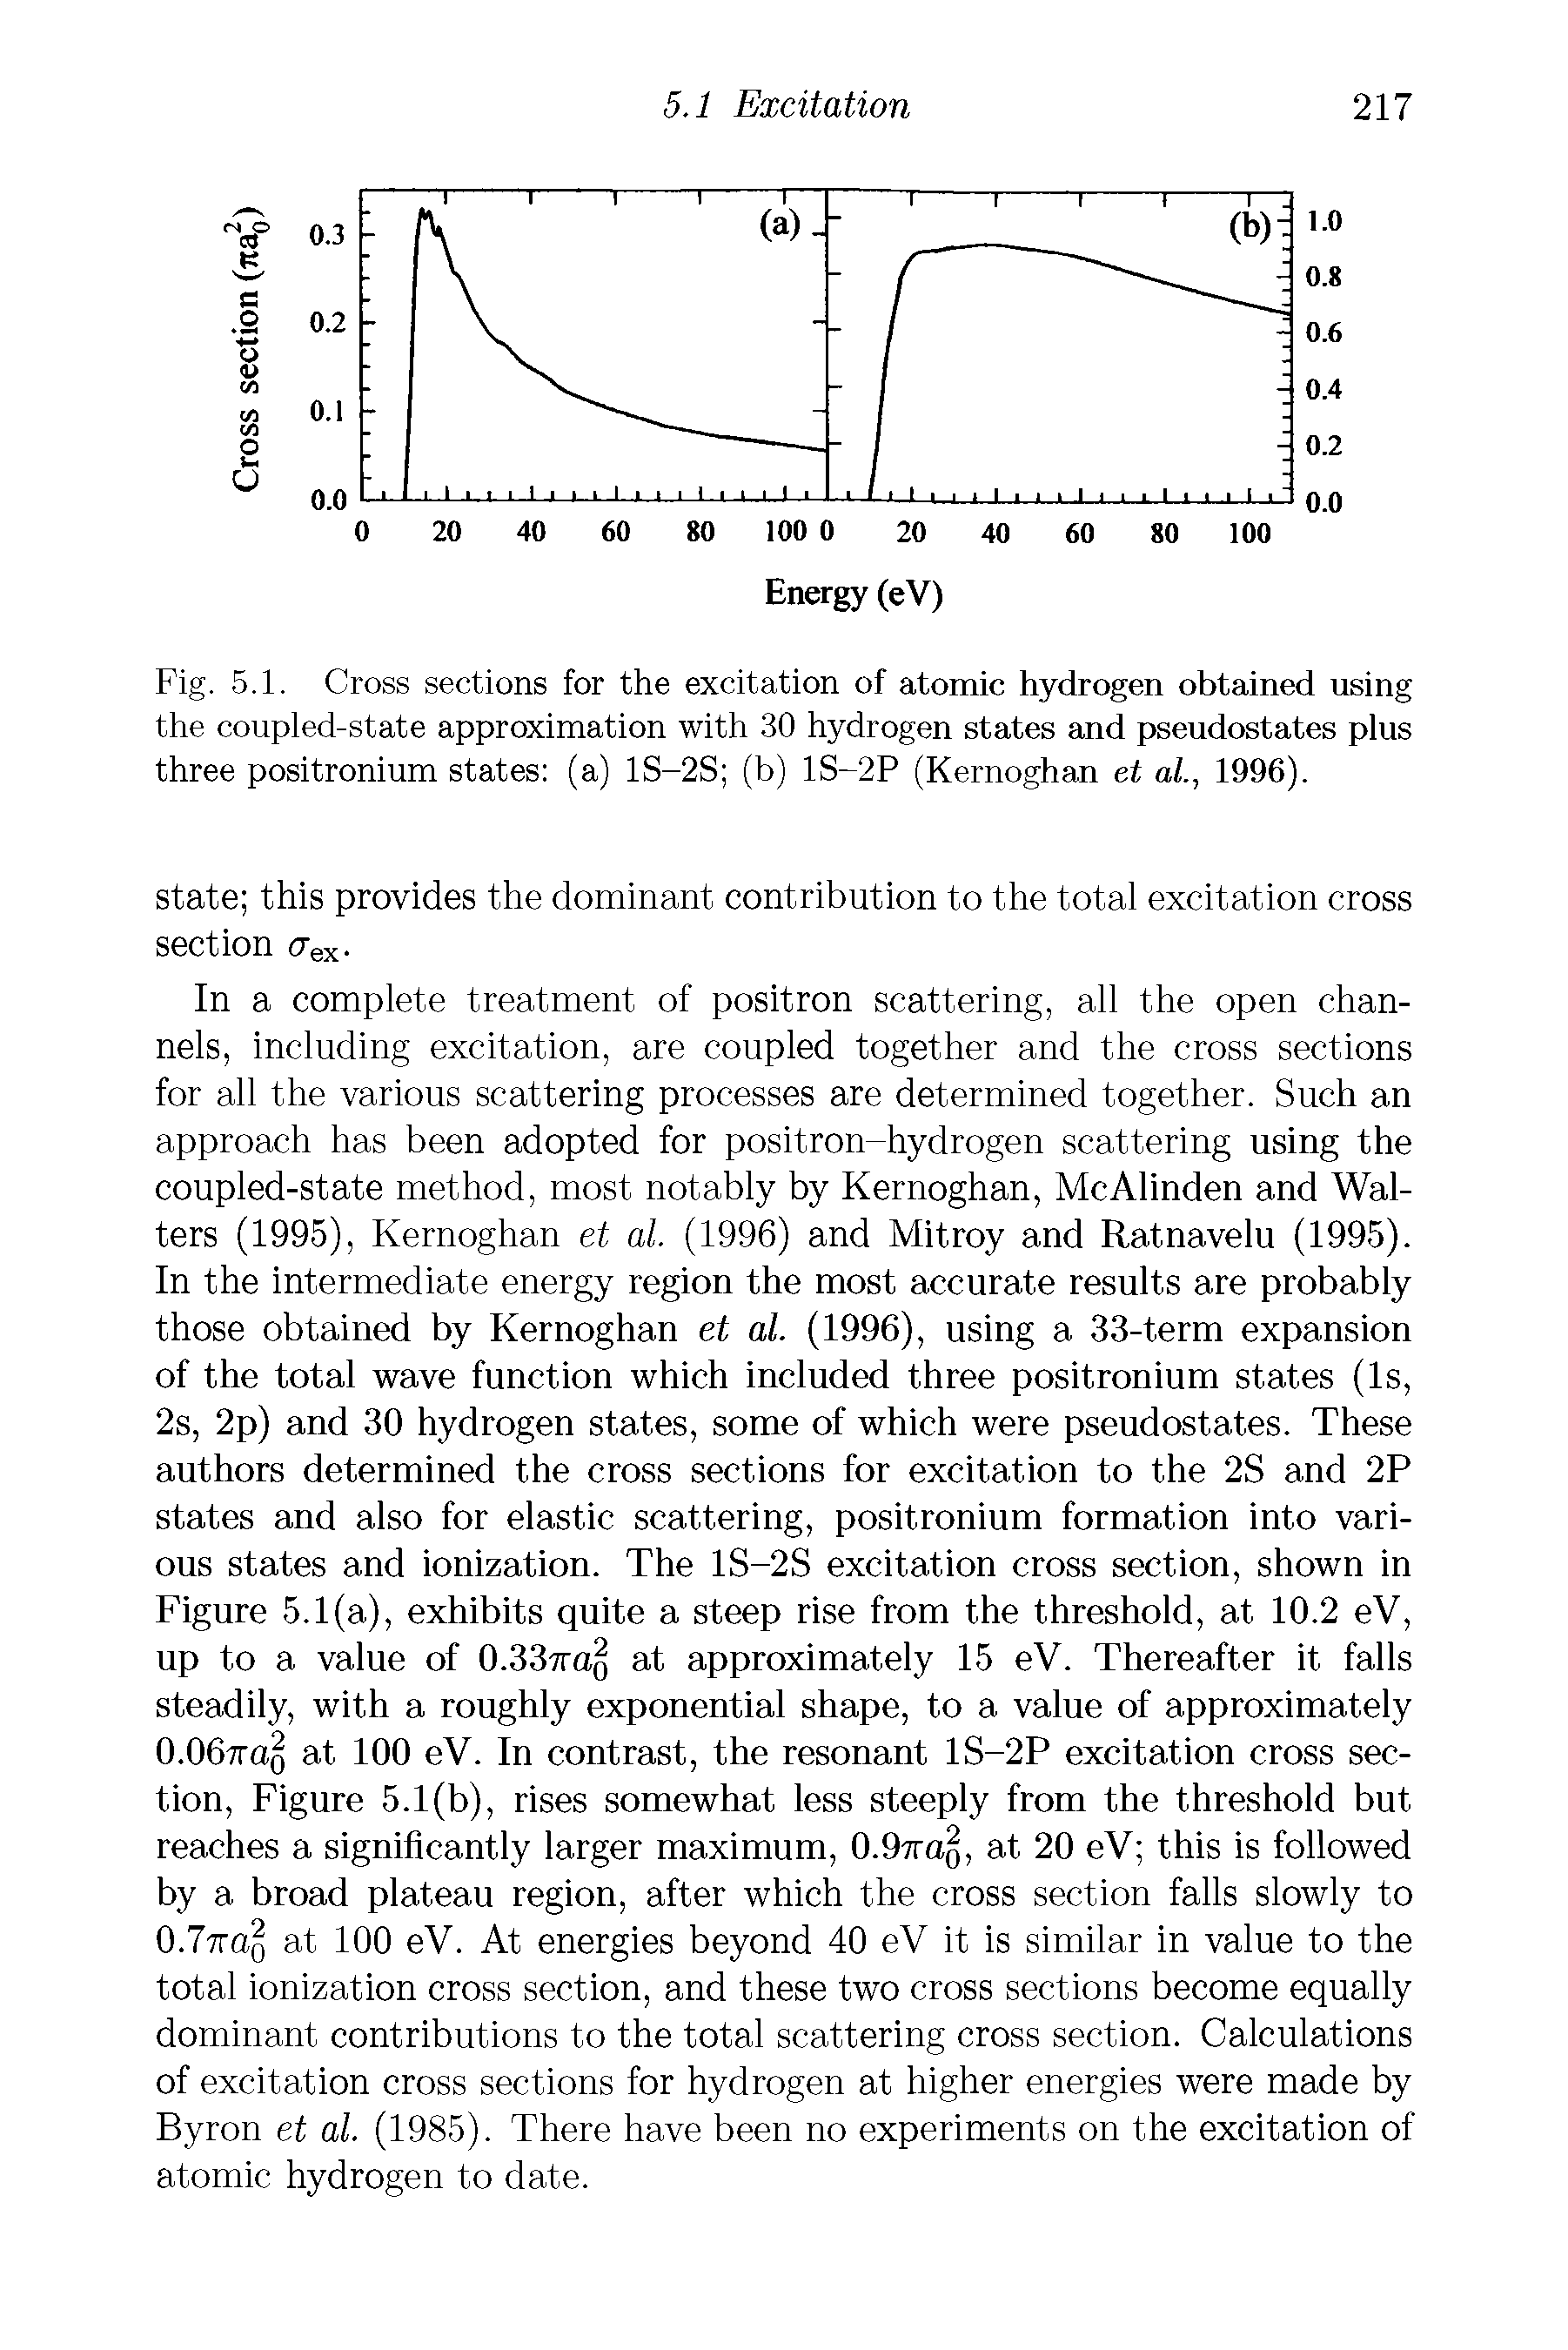 Fig. 5.1. Cross sections for the excitation of atomic hydrogen obtained using the coupled-state approximation with 30 hydrogen states and pseudostates plus three positronium states (a) 1S-2S (b) 1S-2P (Kernoghan et al., 1996).